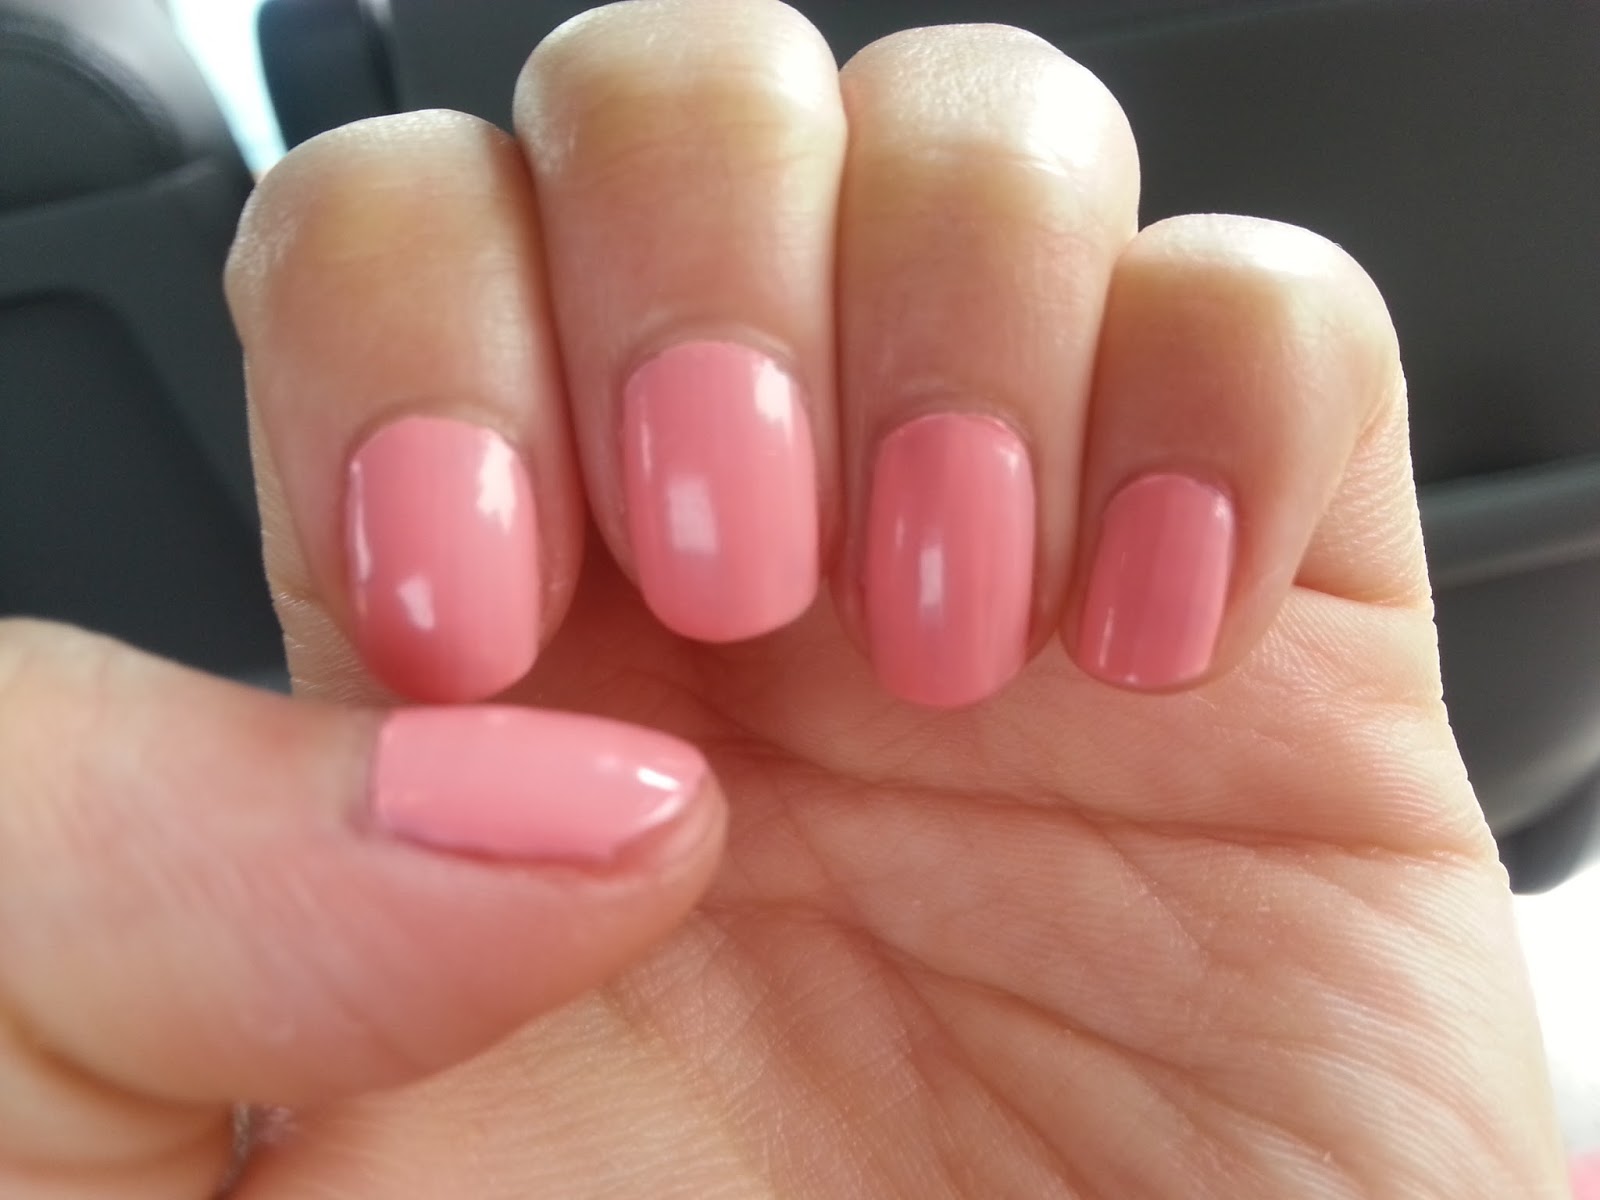 7. Orly "Cotton Candy" - wide 5